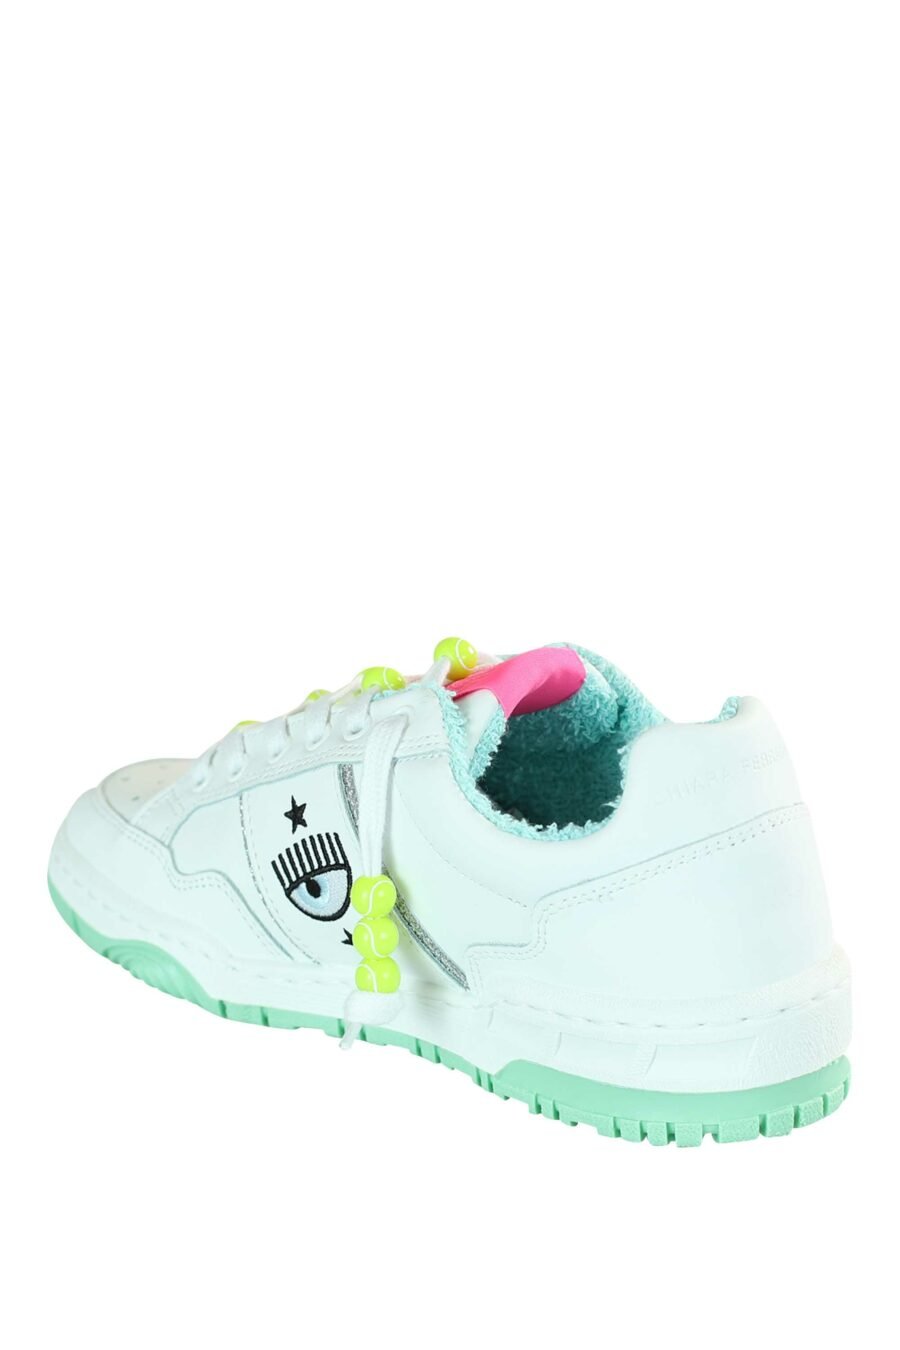 White trainers with eye logo and multicoloured details - 8059388228850 4